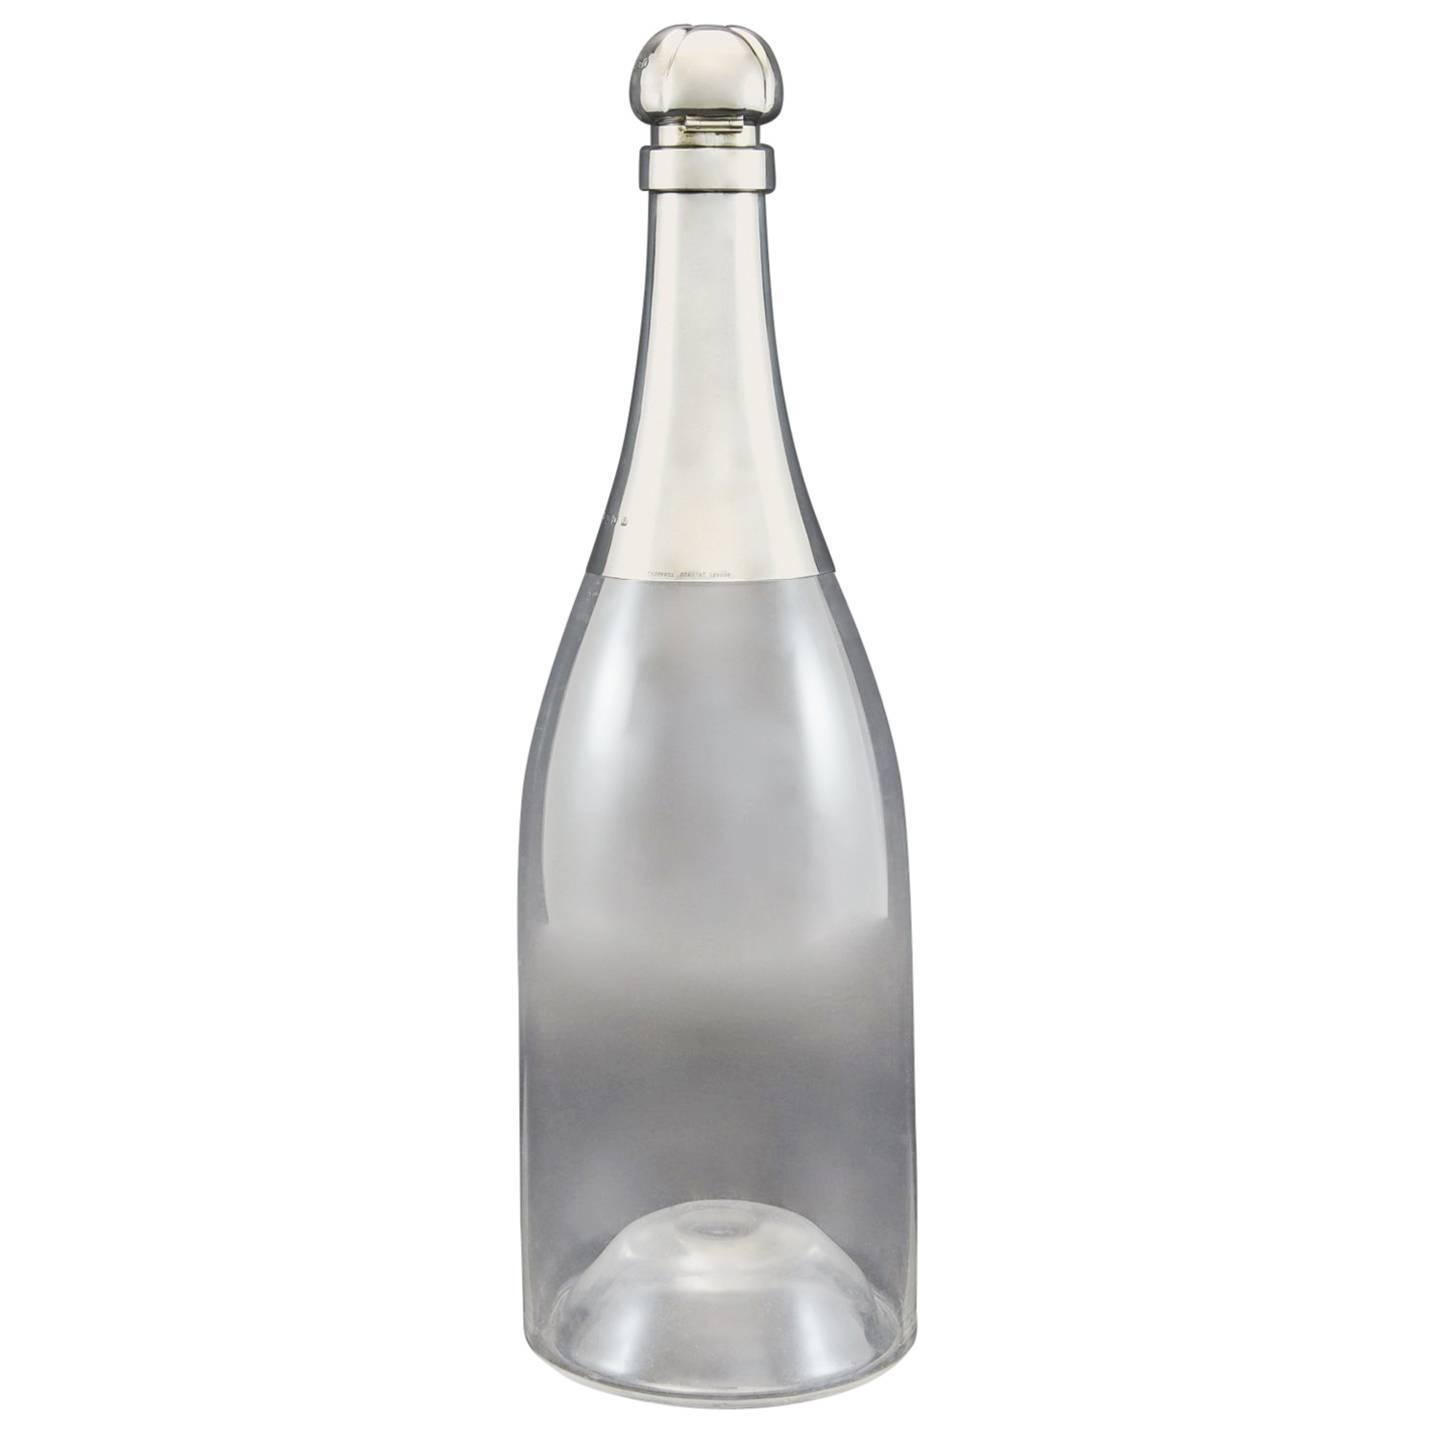 Extraordinary Giant Champagne Bottle Decanter with Sterling top, 1892